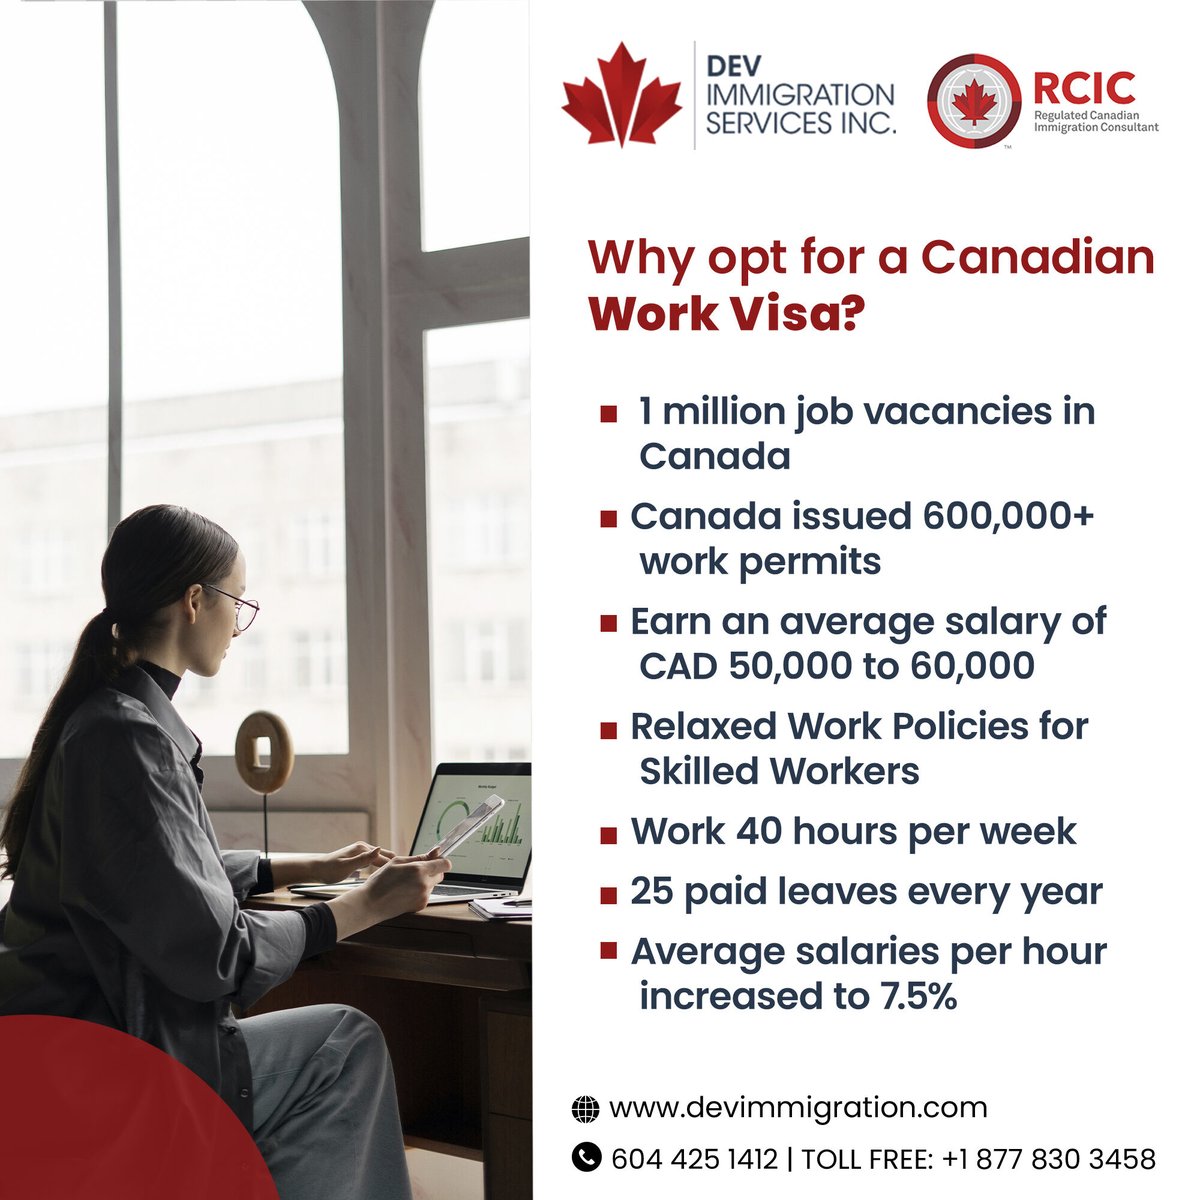 Looking for a Career Change with Great Benefits? Consider a Canadian Work Visa! There's a booming job market with ample opportunities!
Explore your work visa options and connect with us!
devimmigration.com/live-in-canada…
#canada #workvisa #canadianworkpermit #workincanda